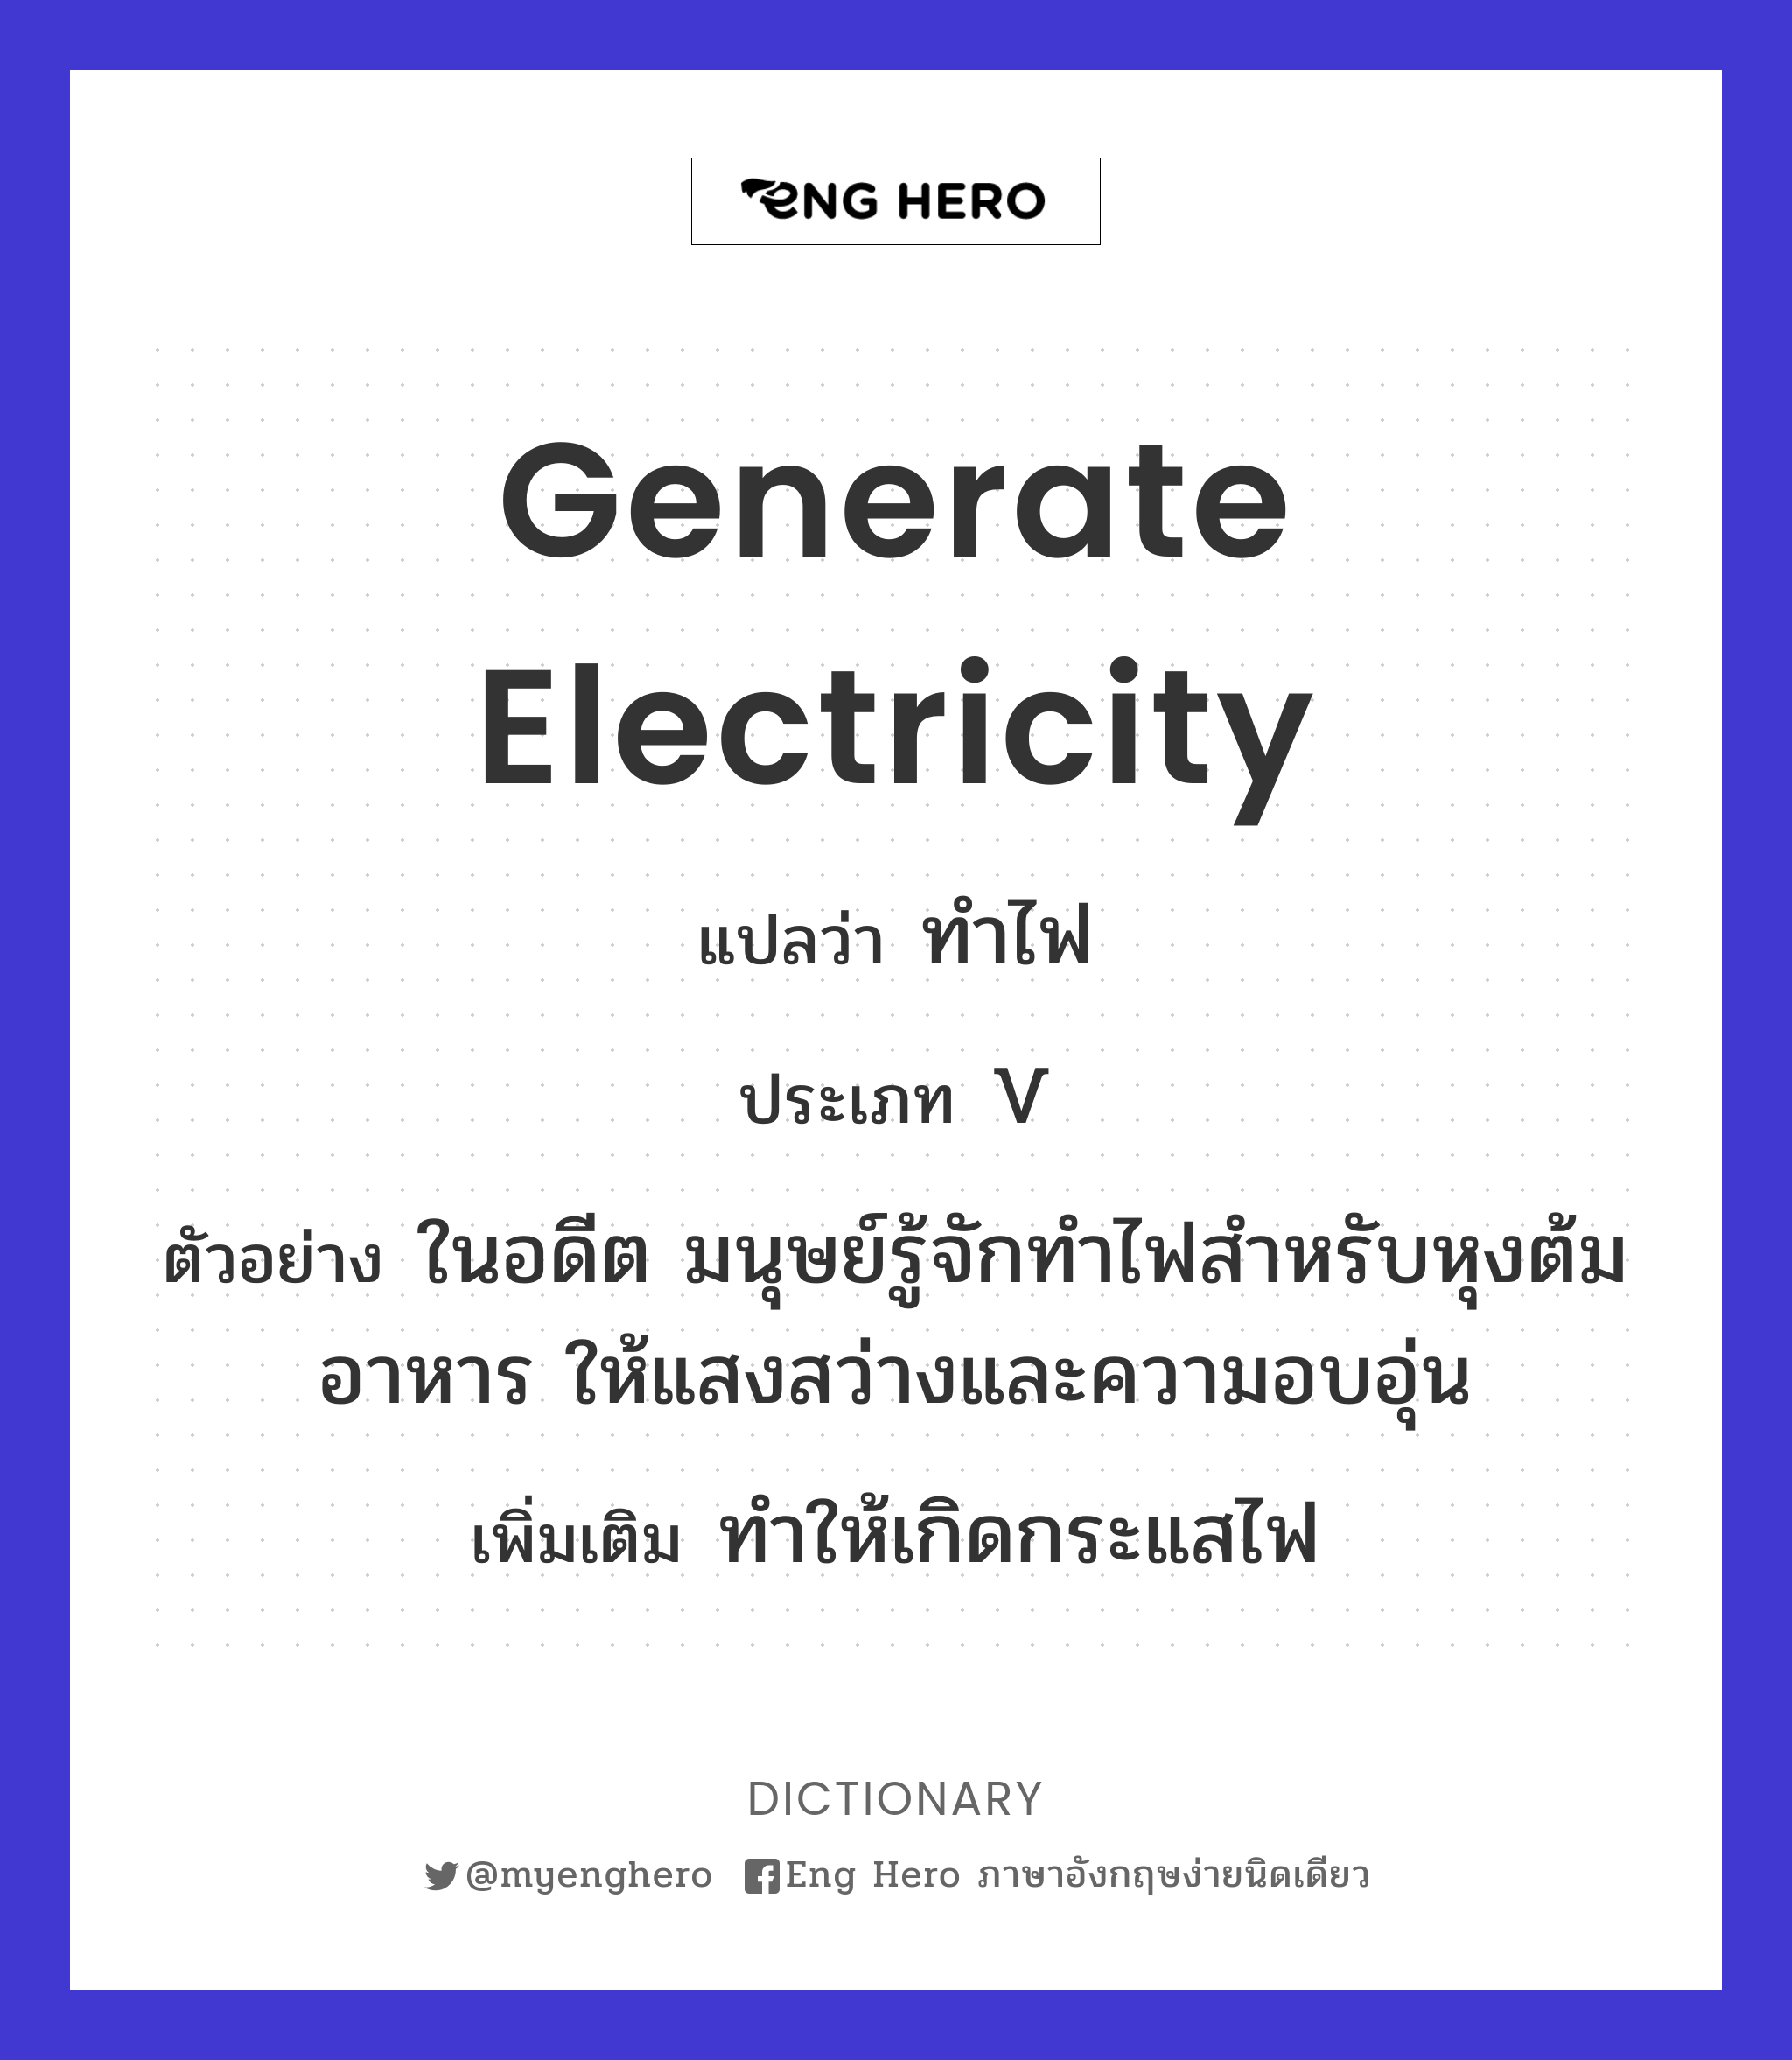 generate electricity